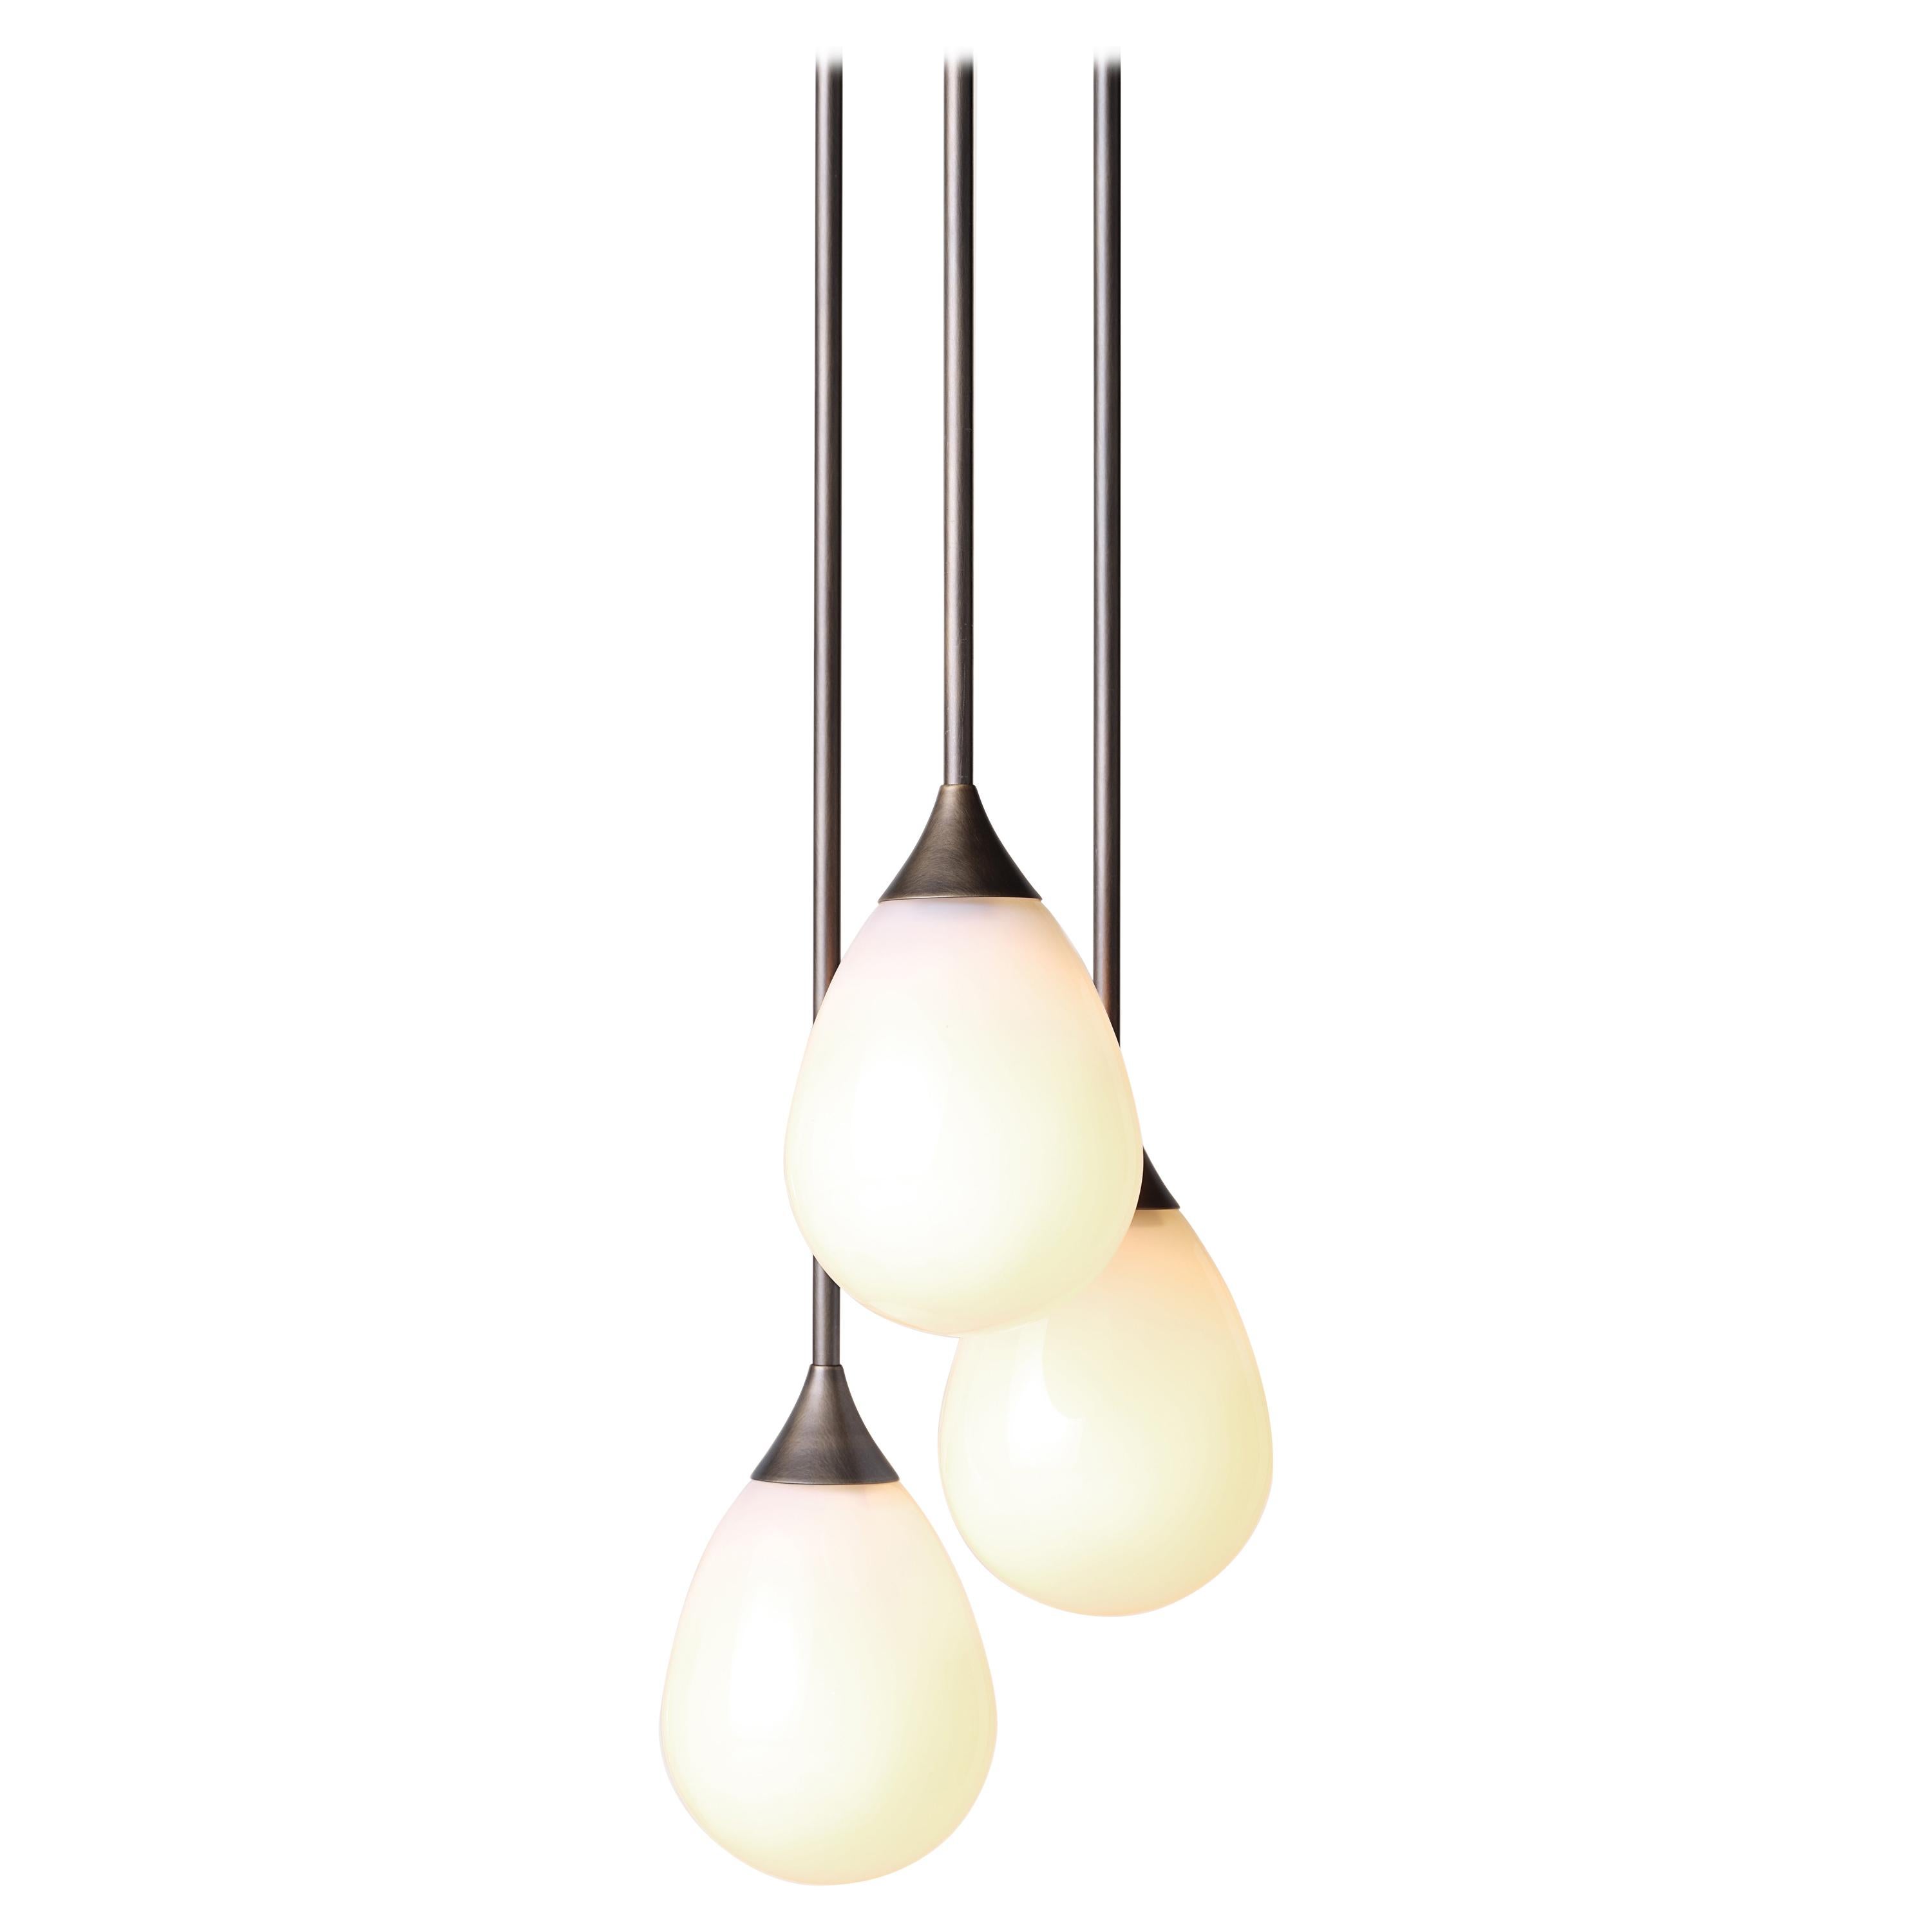 Konekt Small Teardrop Pendant 3 Cluster with White Glass For Sale